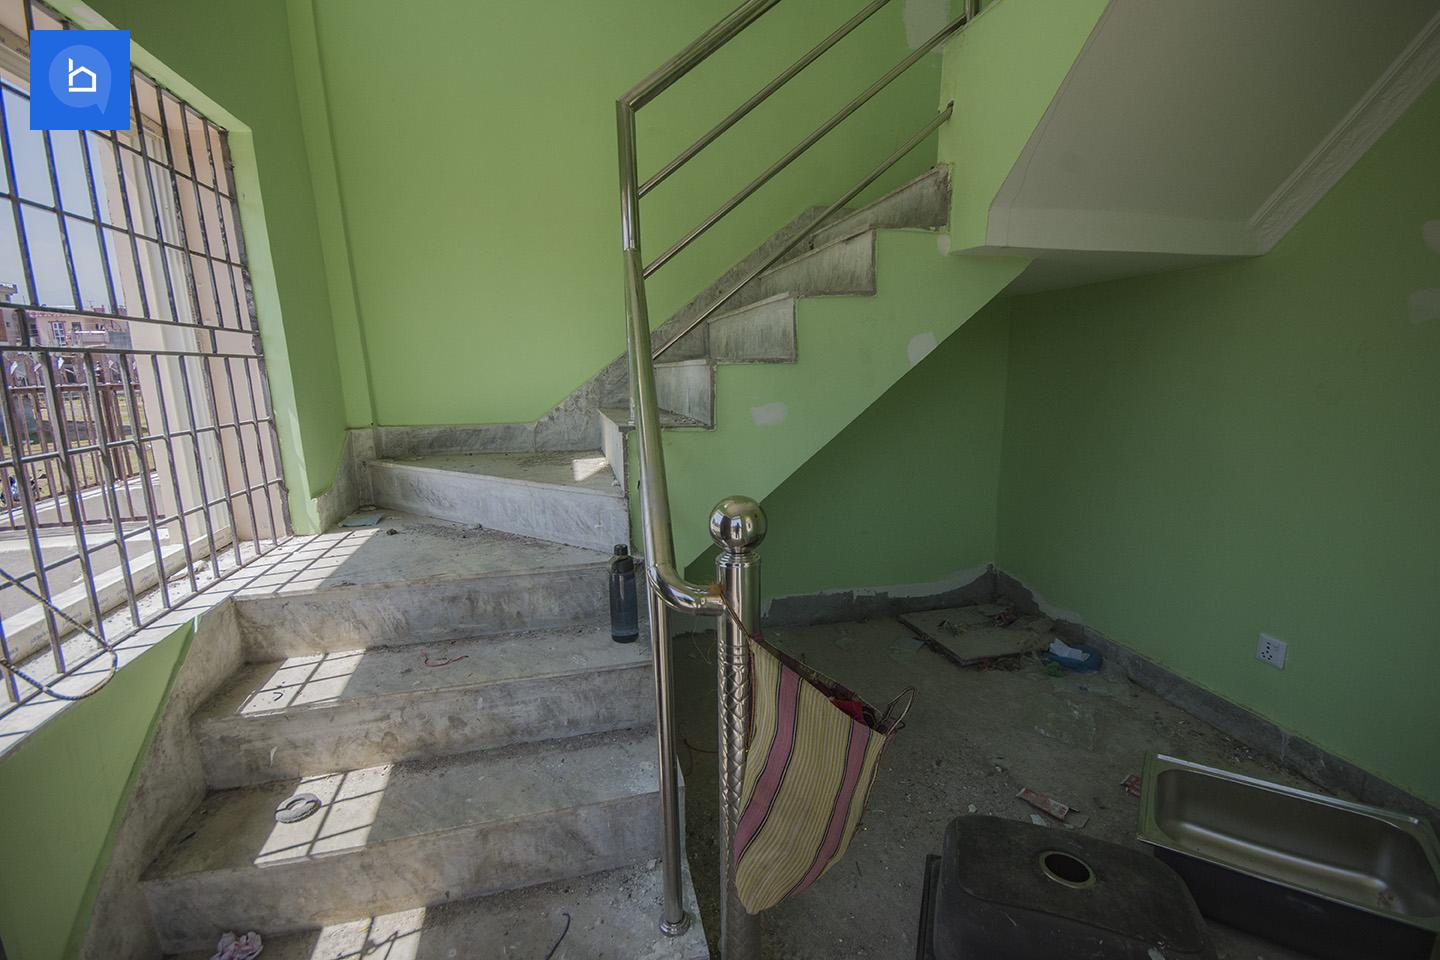 House for Sale in Imadol, Lalitpur Image 4